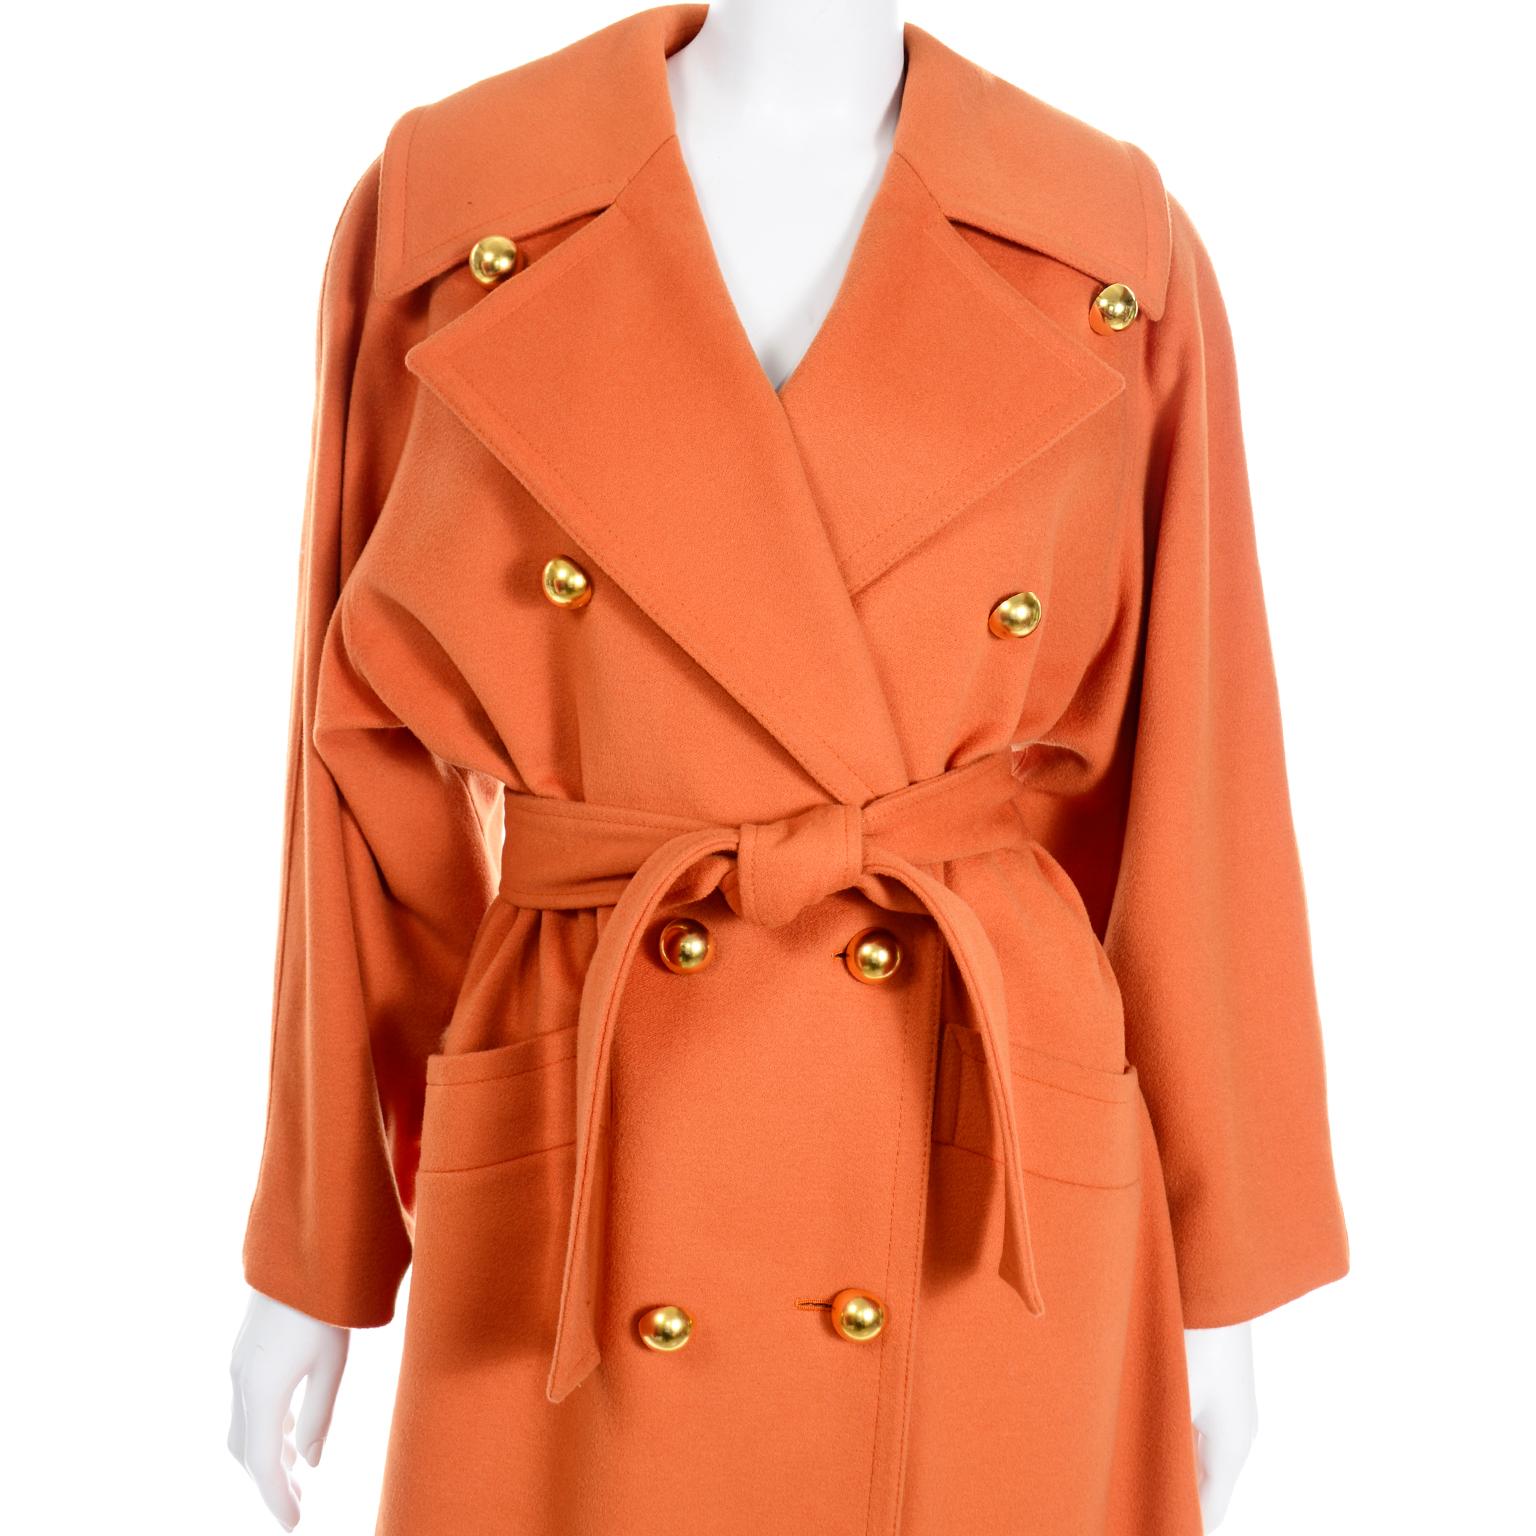 Guy Laroche Vintage Orange Cashmere Blend Double Breasted Trench Coat With Belt In Excellent Condition For Sale In Portland, OR